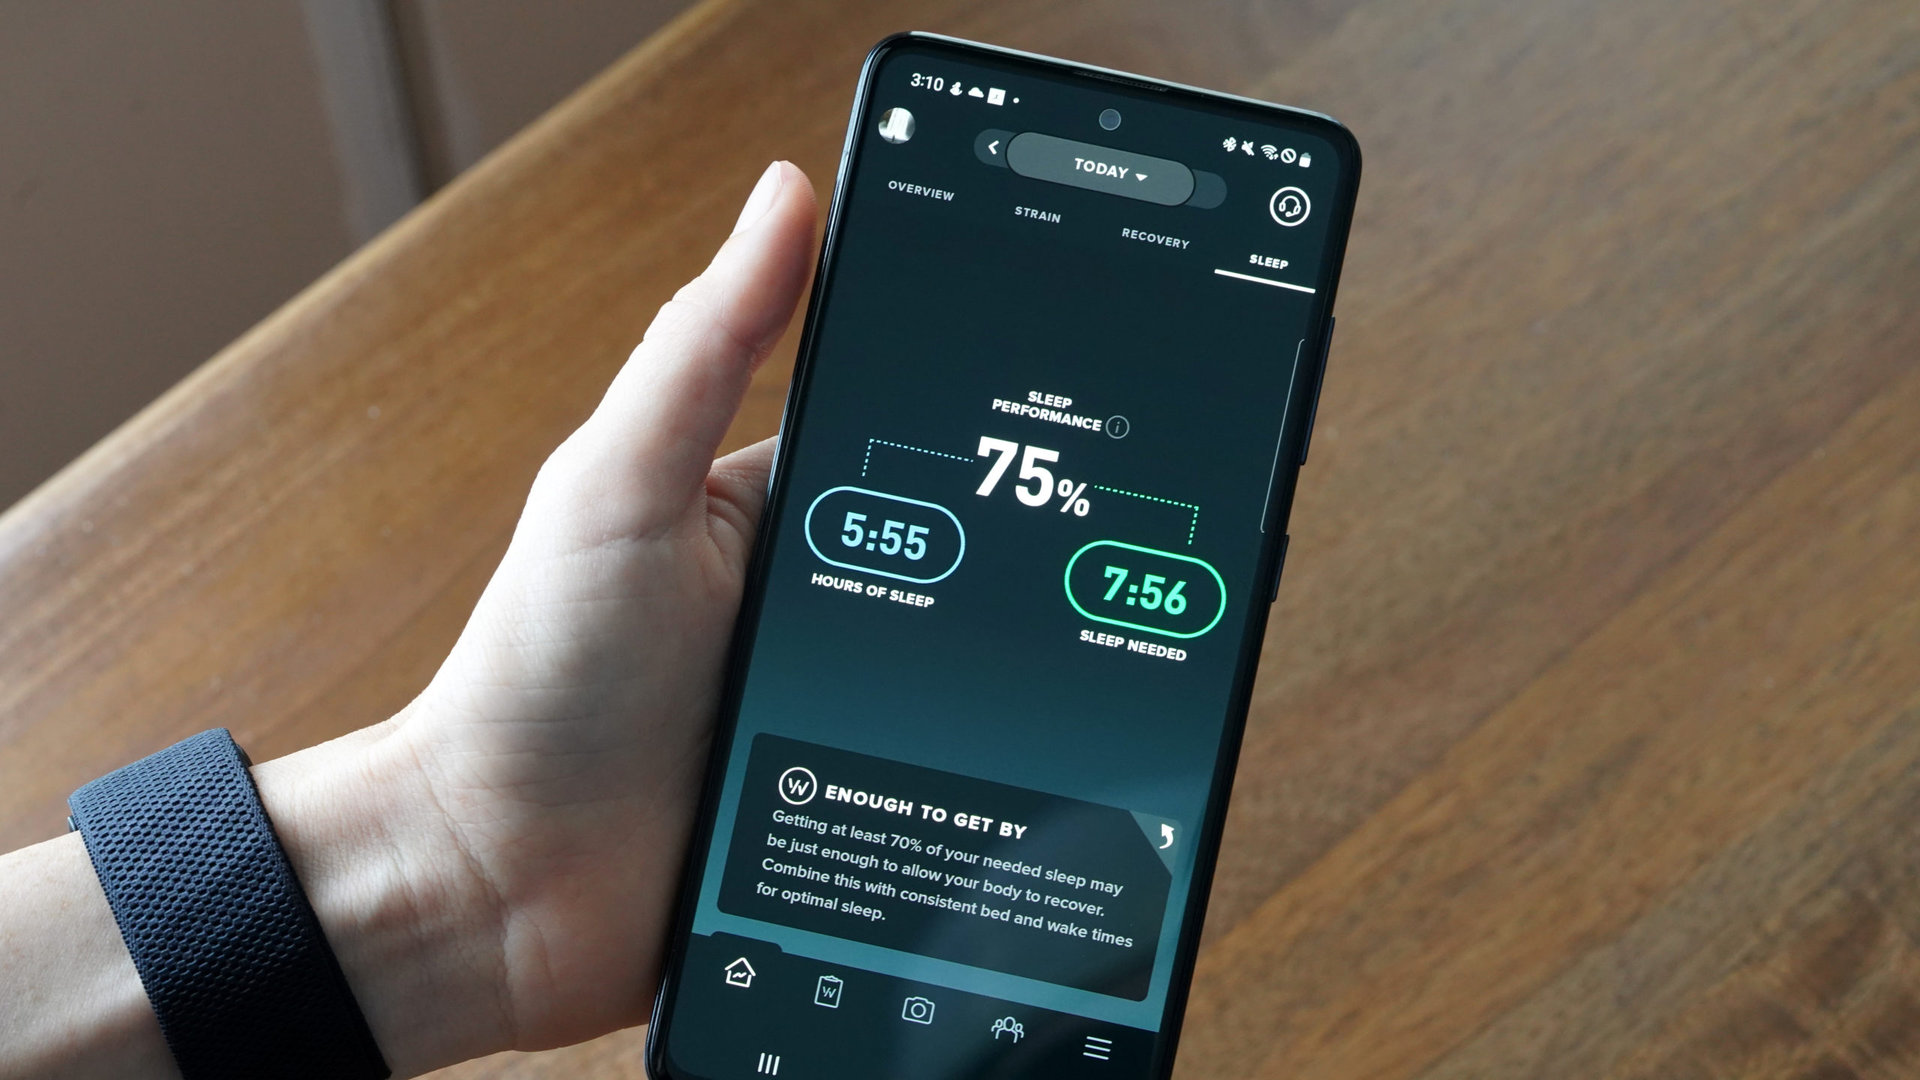 A user reviews their Sleep Performance in the Whoop app on their Galaxy A51.